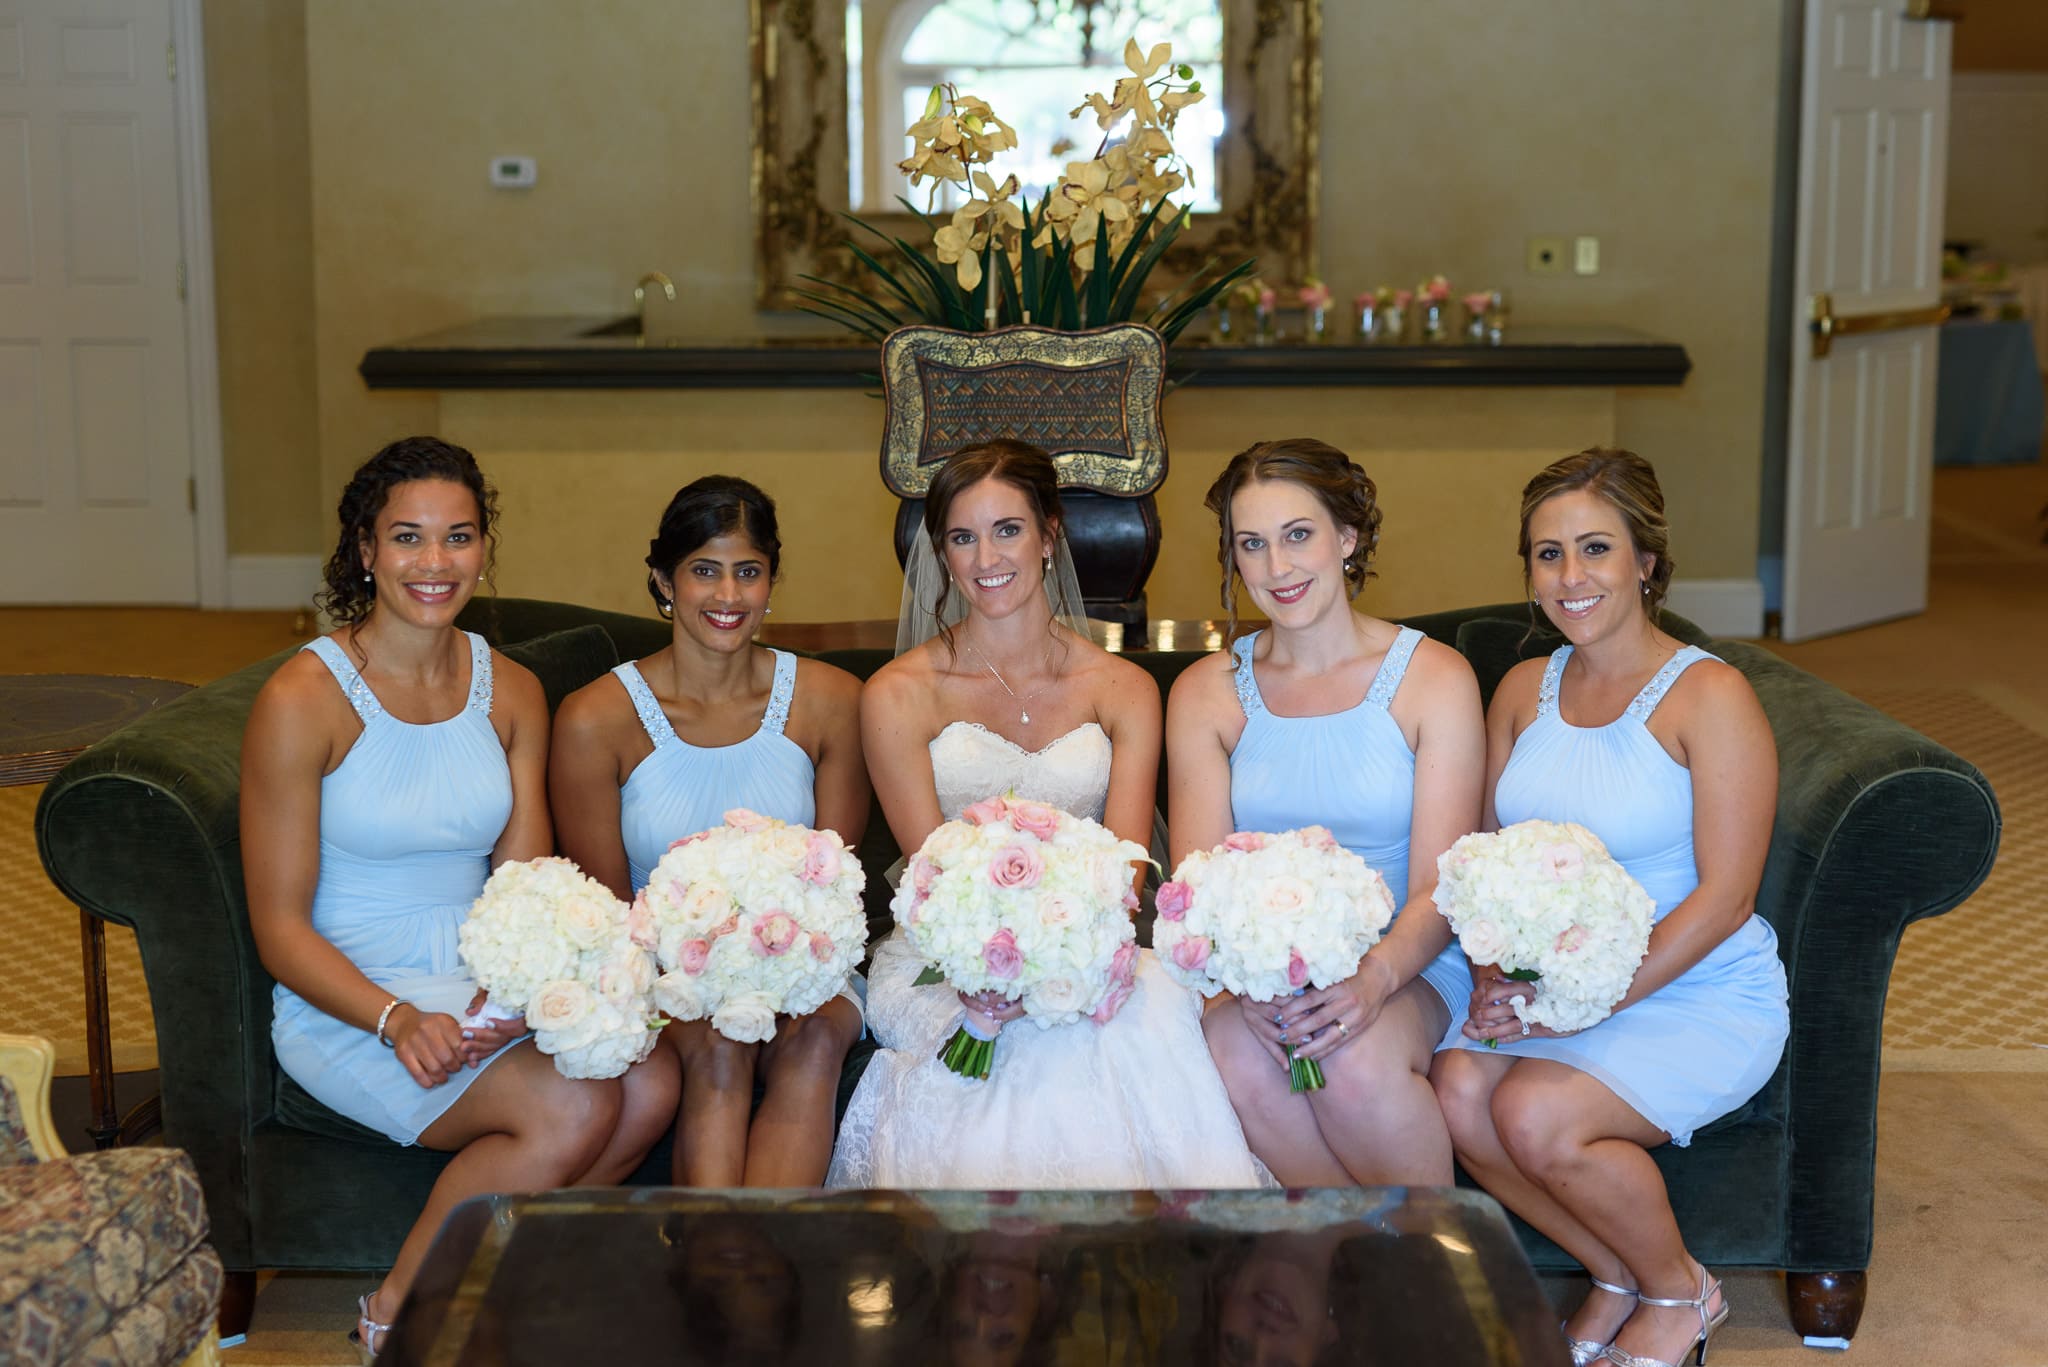 Bridesmaids sitting on couch together - Pawleys Plantation